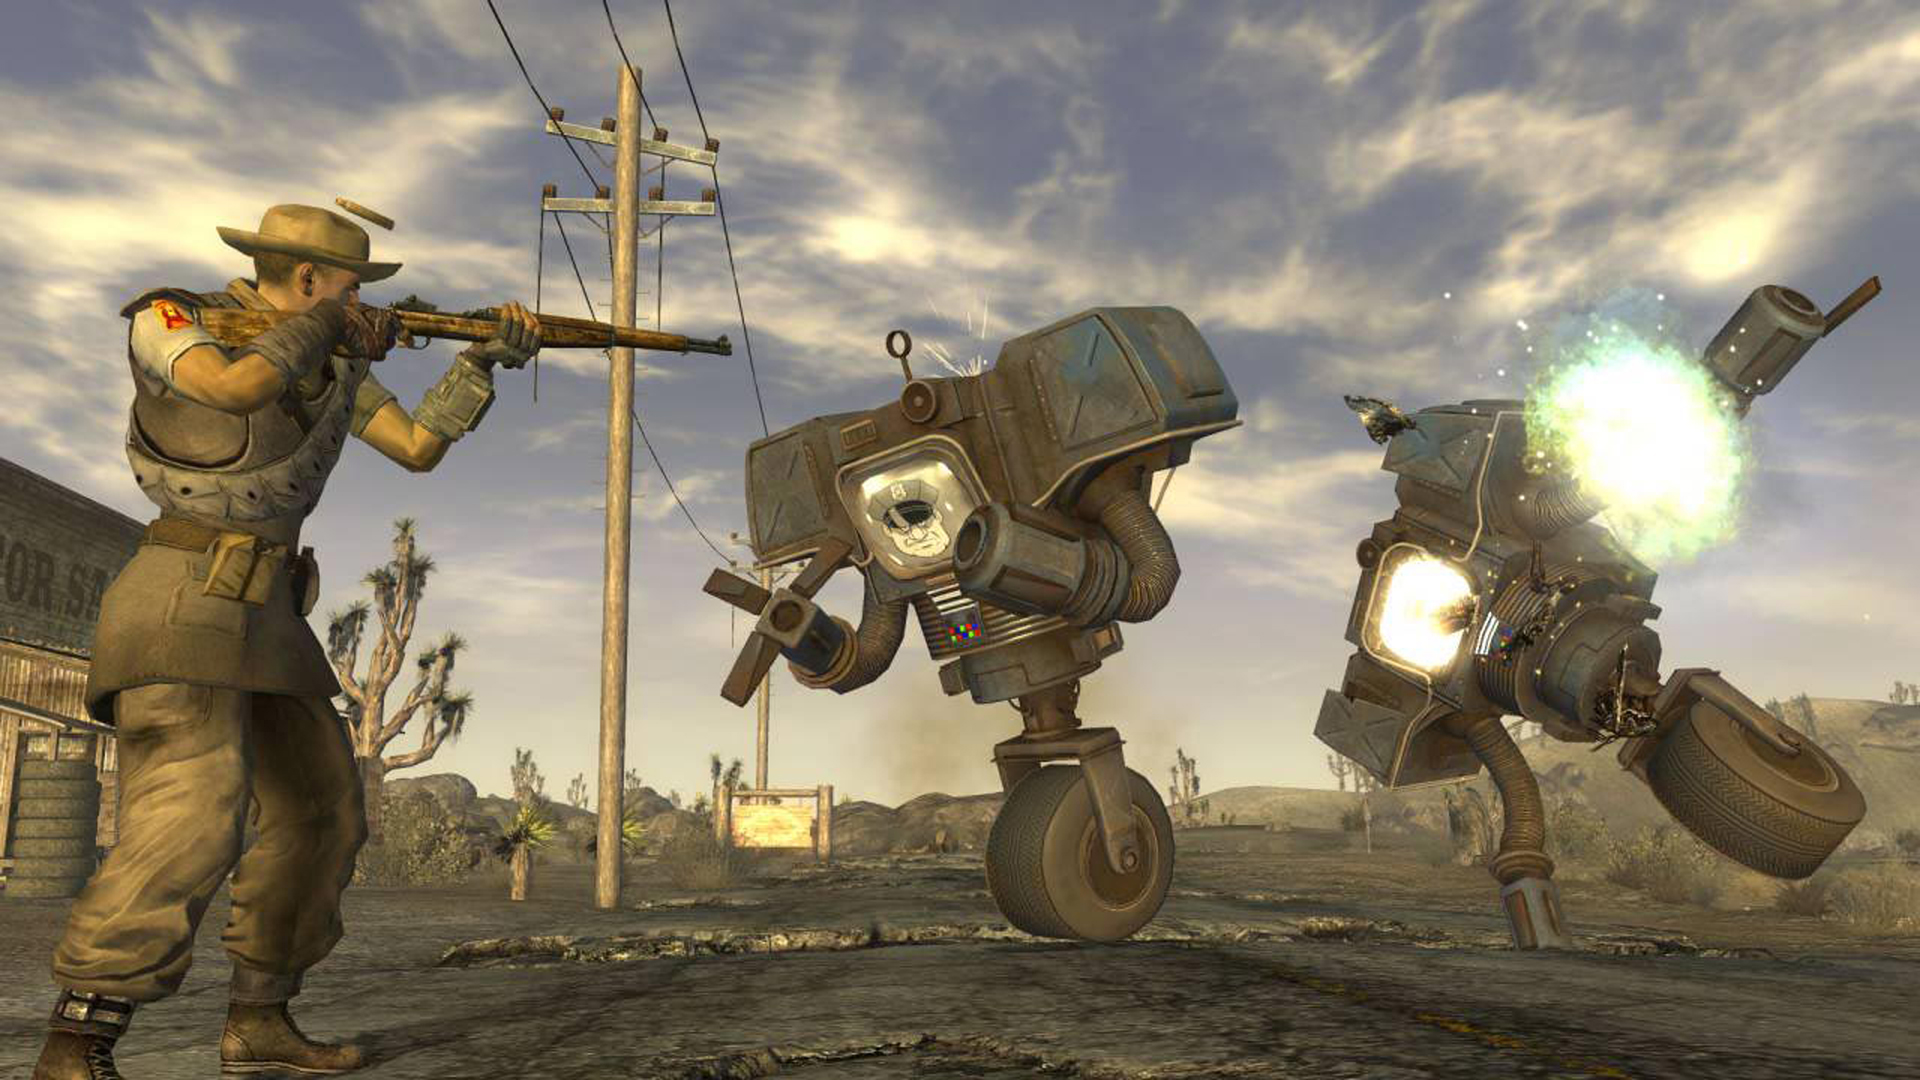 Fallout: New Vegas director says his approach to weapon balance is "mostly vibes-based," because "the important thing is to see how things feel in practice"